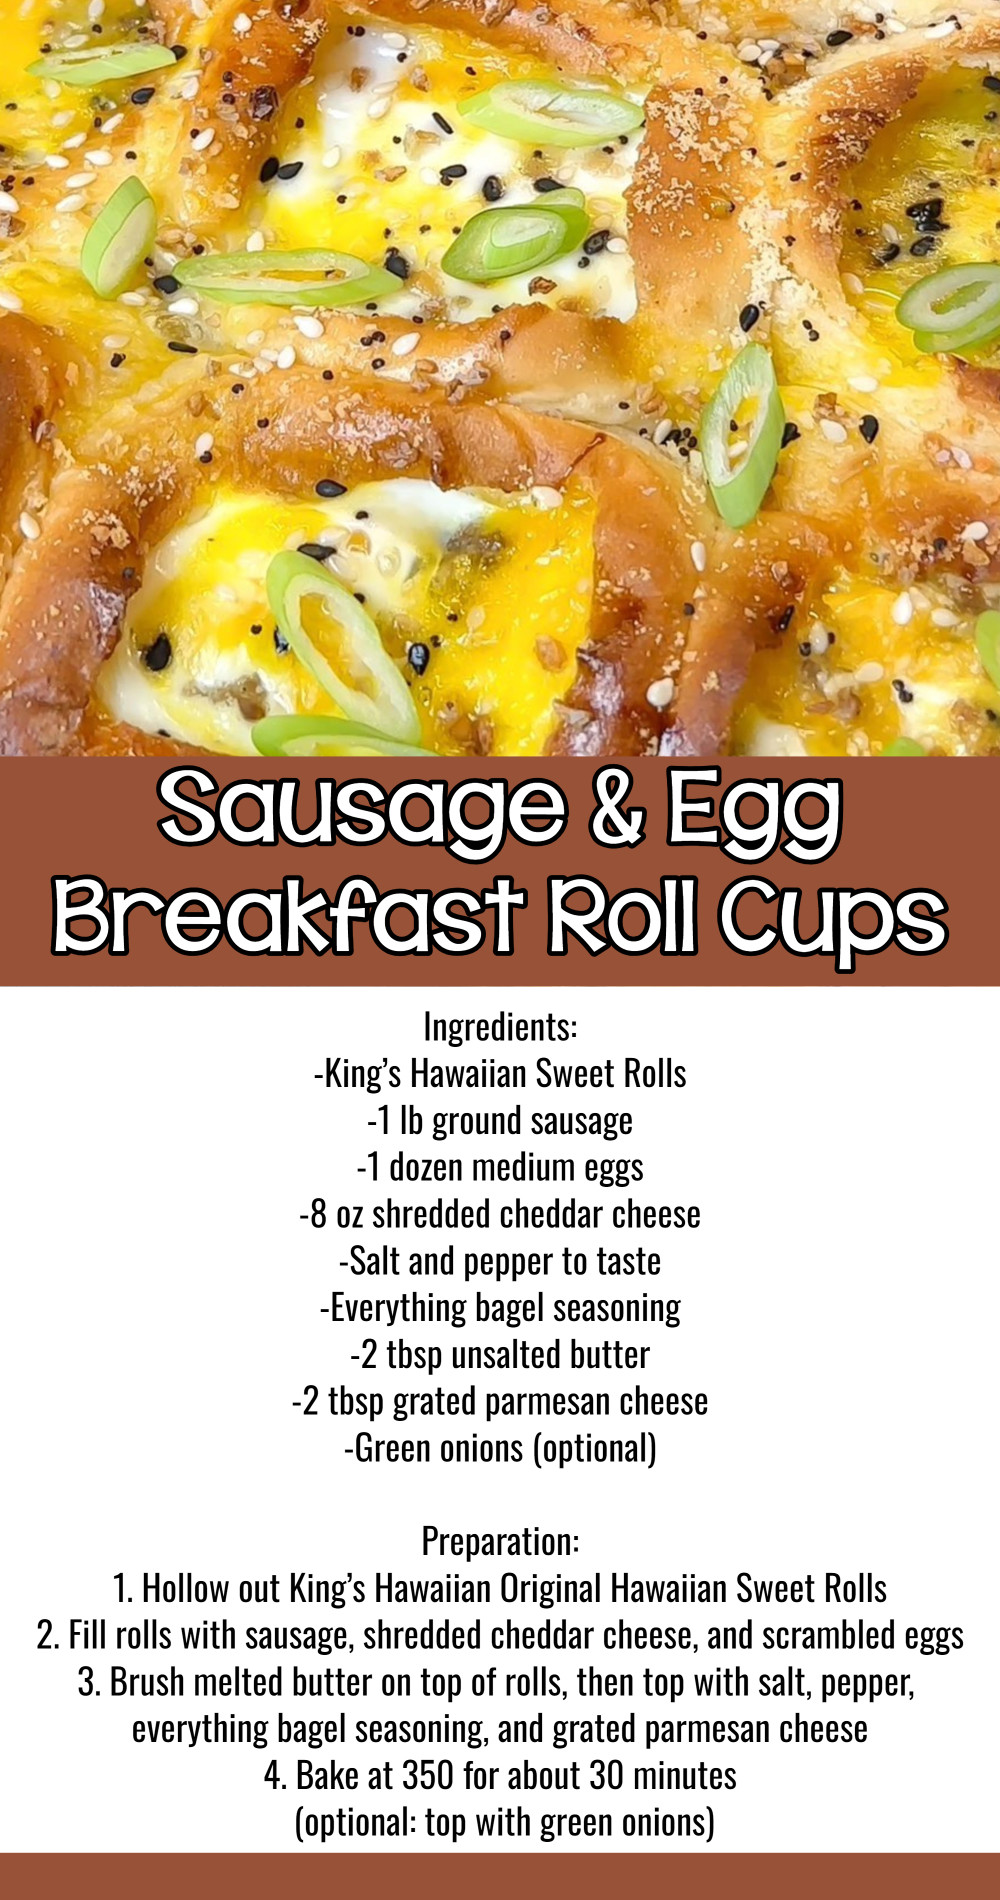 Sausage and Egg Breakfast Roll Cups